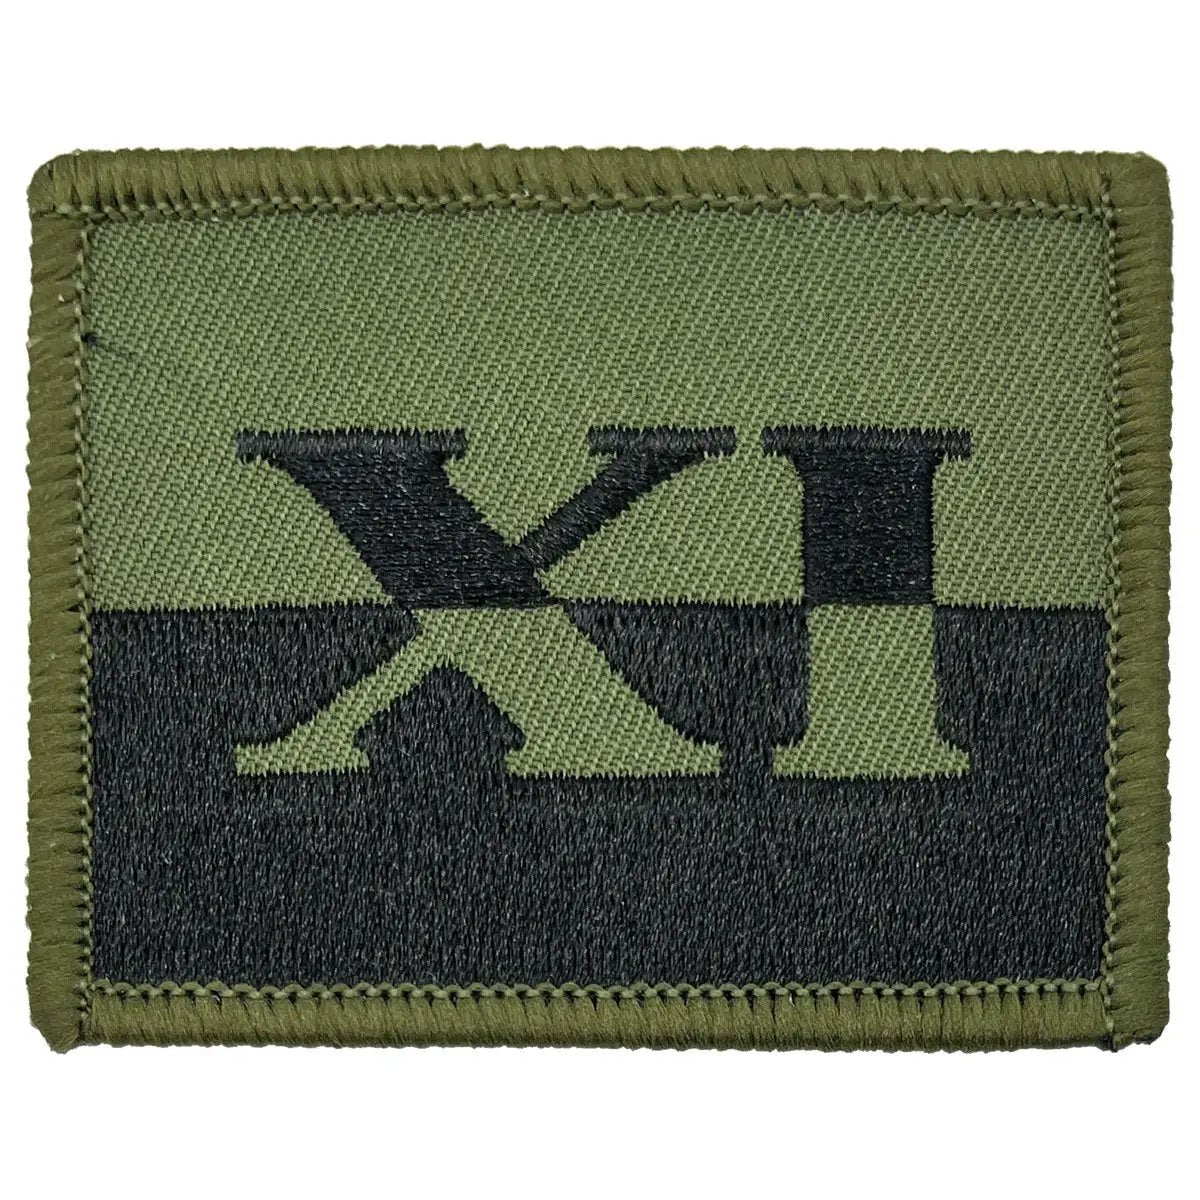 11 Signal Regiment TRF - Iron or Sewn On Patch - John Bull Clothing